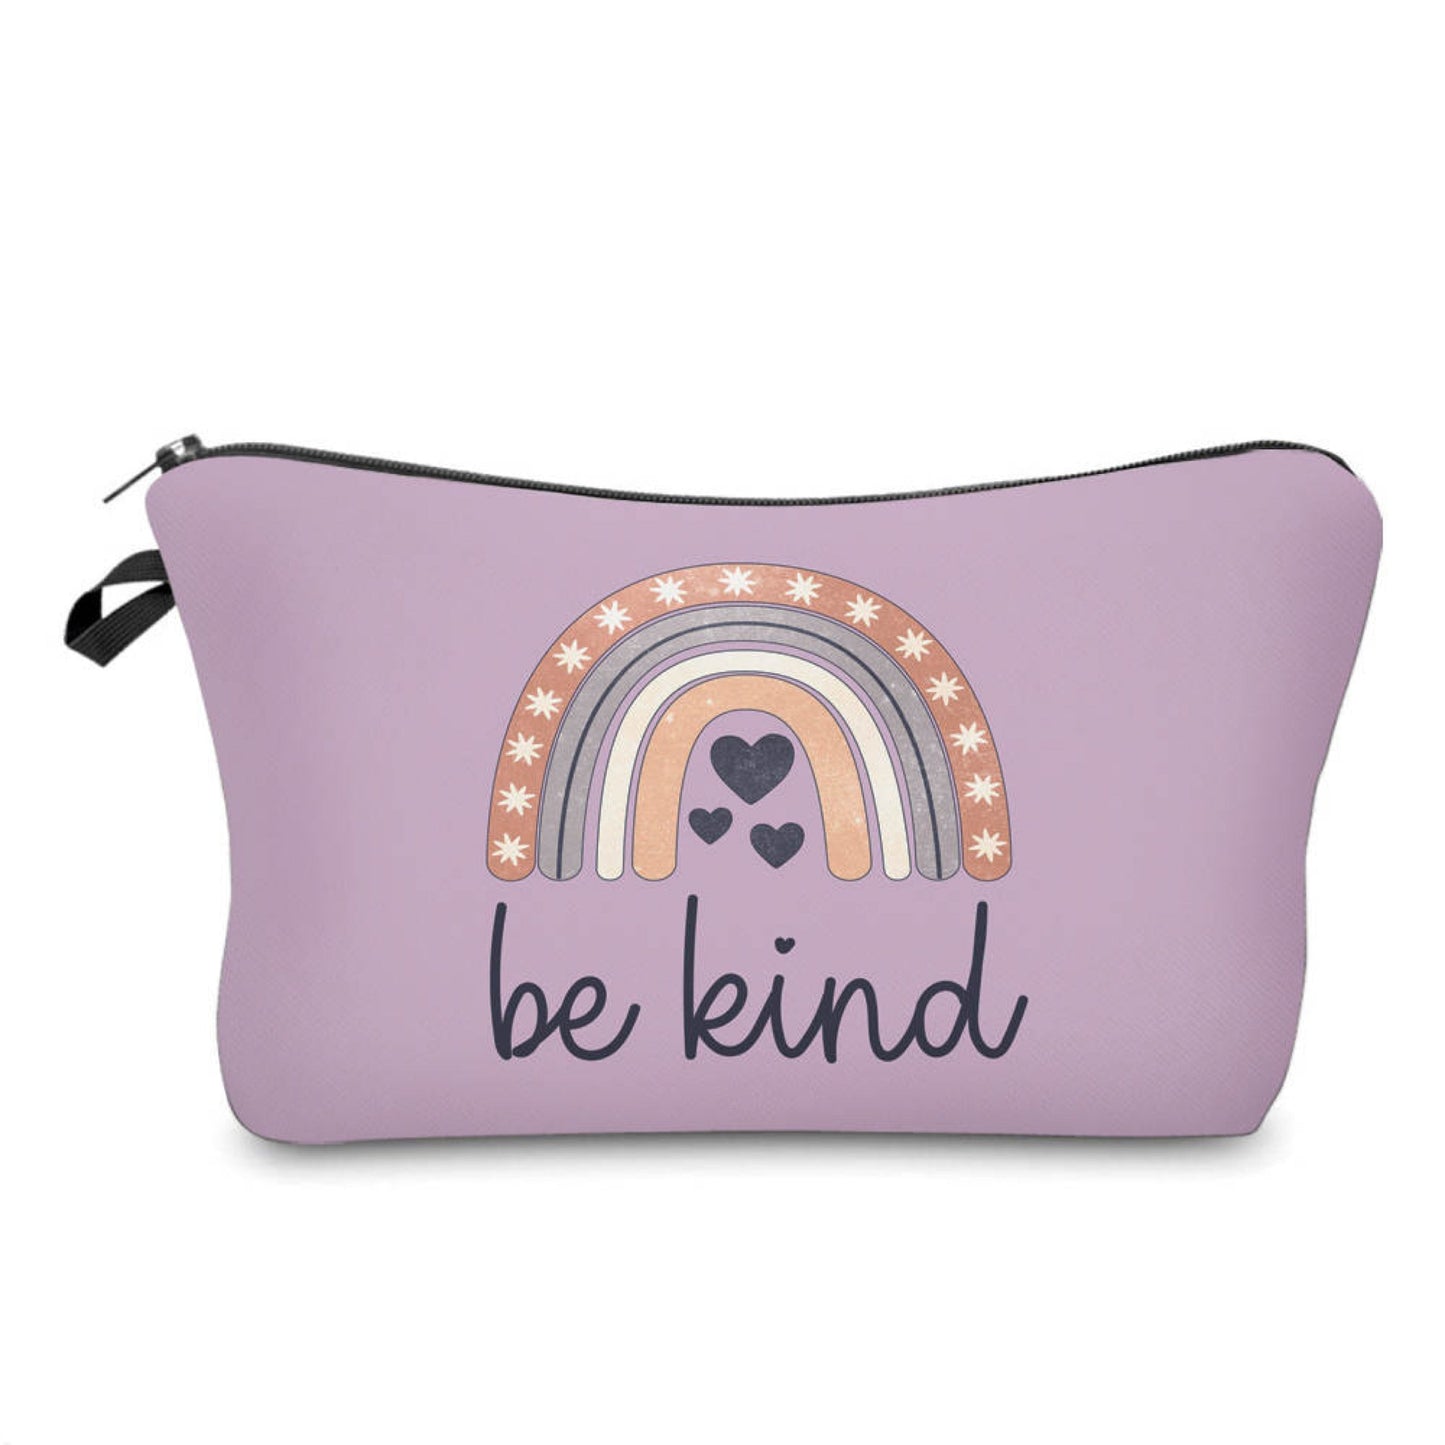 Pouch - Be Kind Lavender Rainbow